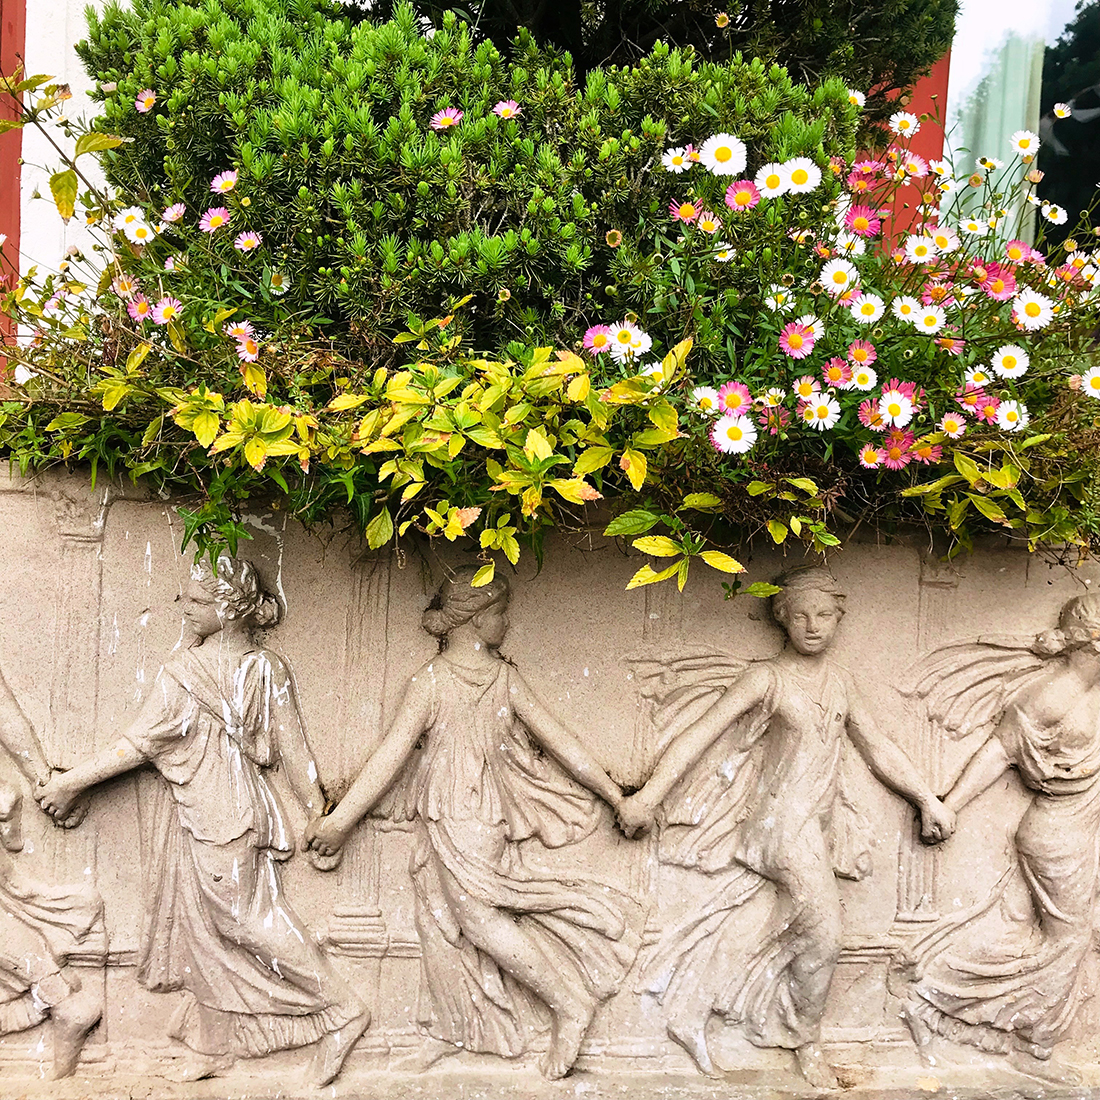 Pink and white Erigeron flowers dance above the carved ladies on the old stone planter.